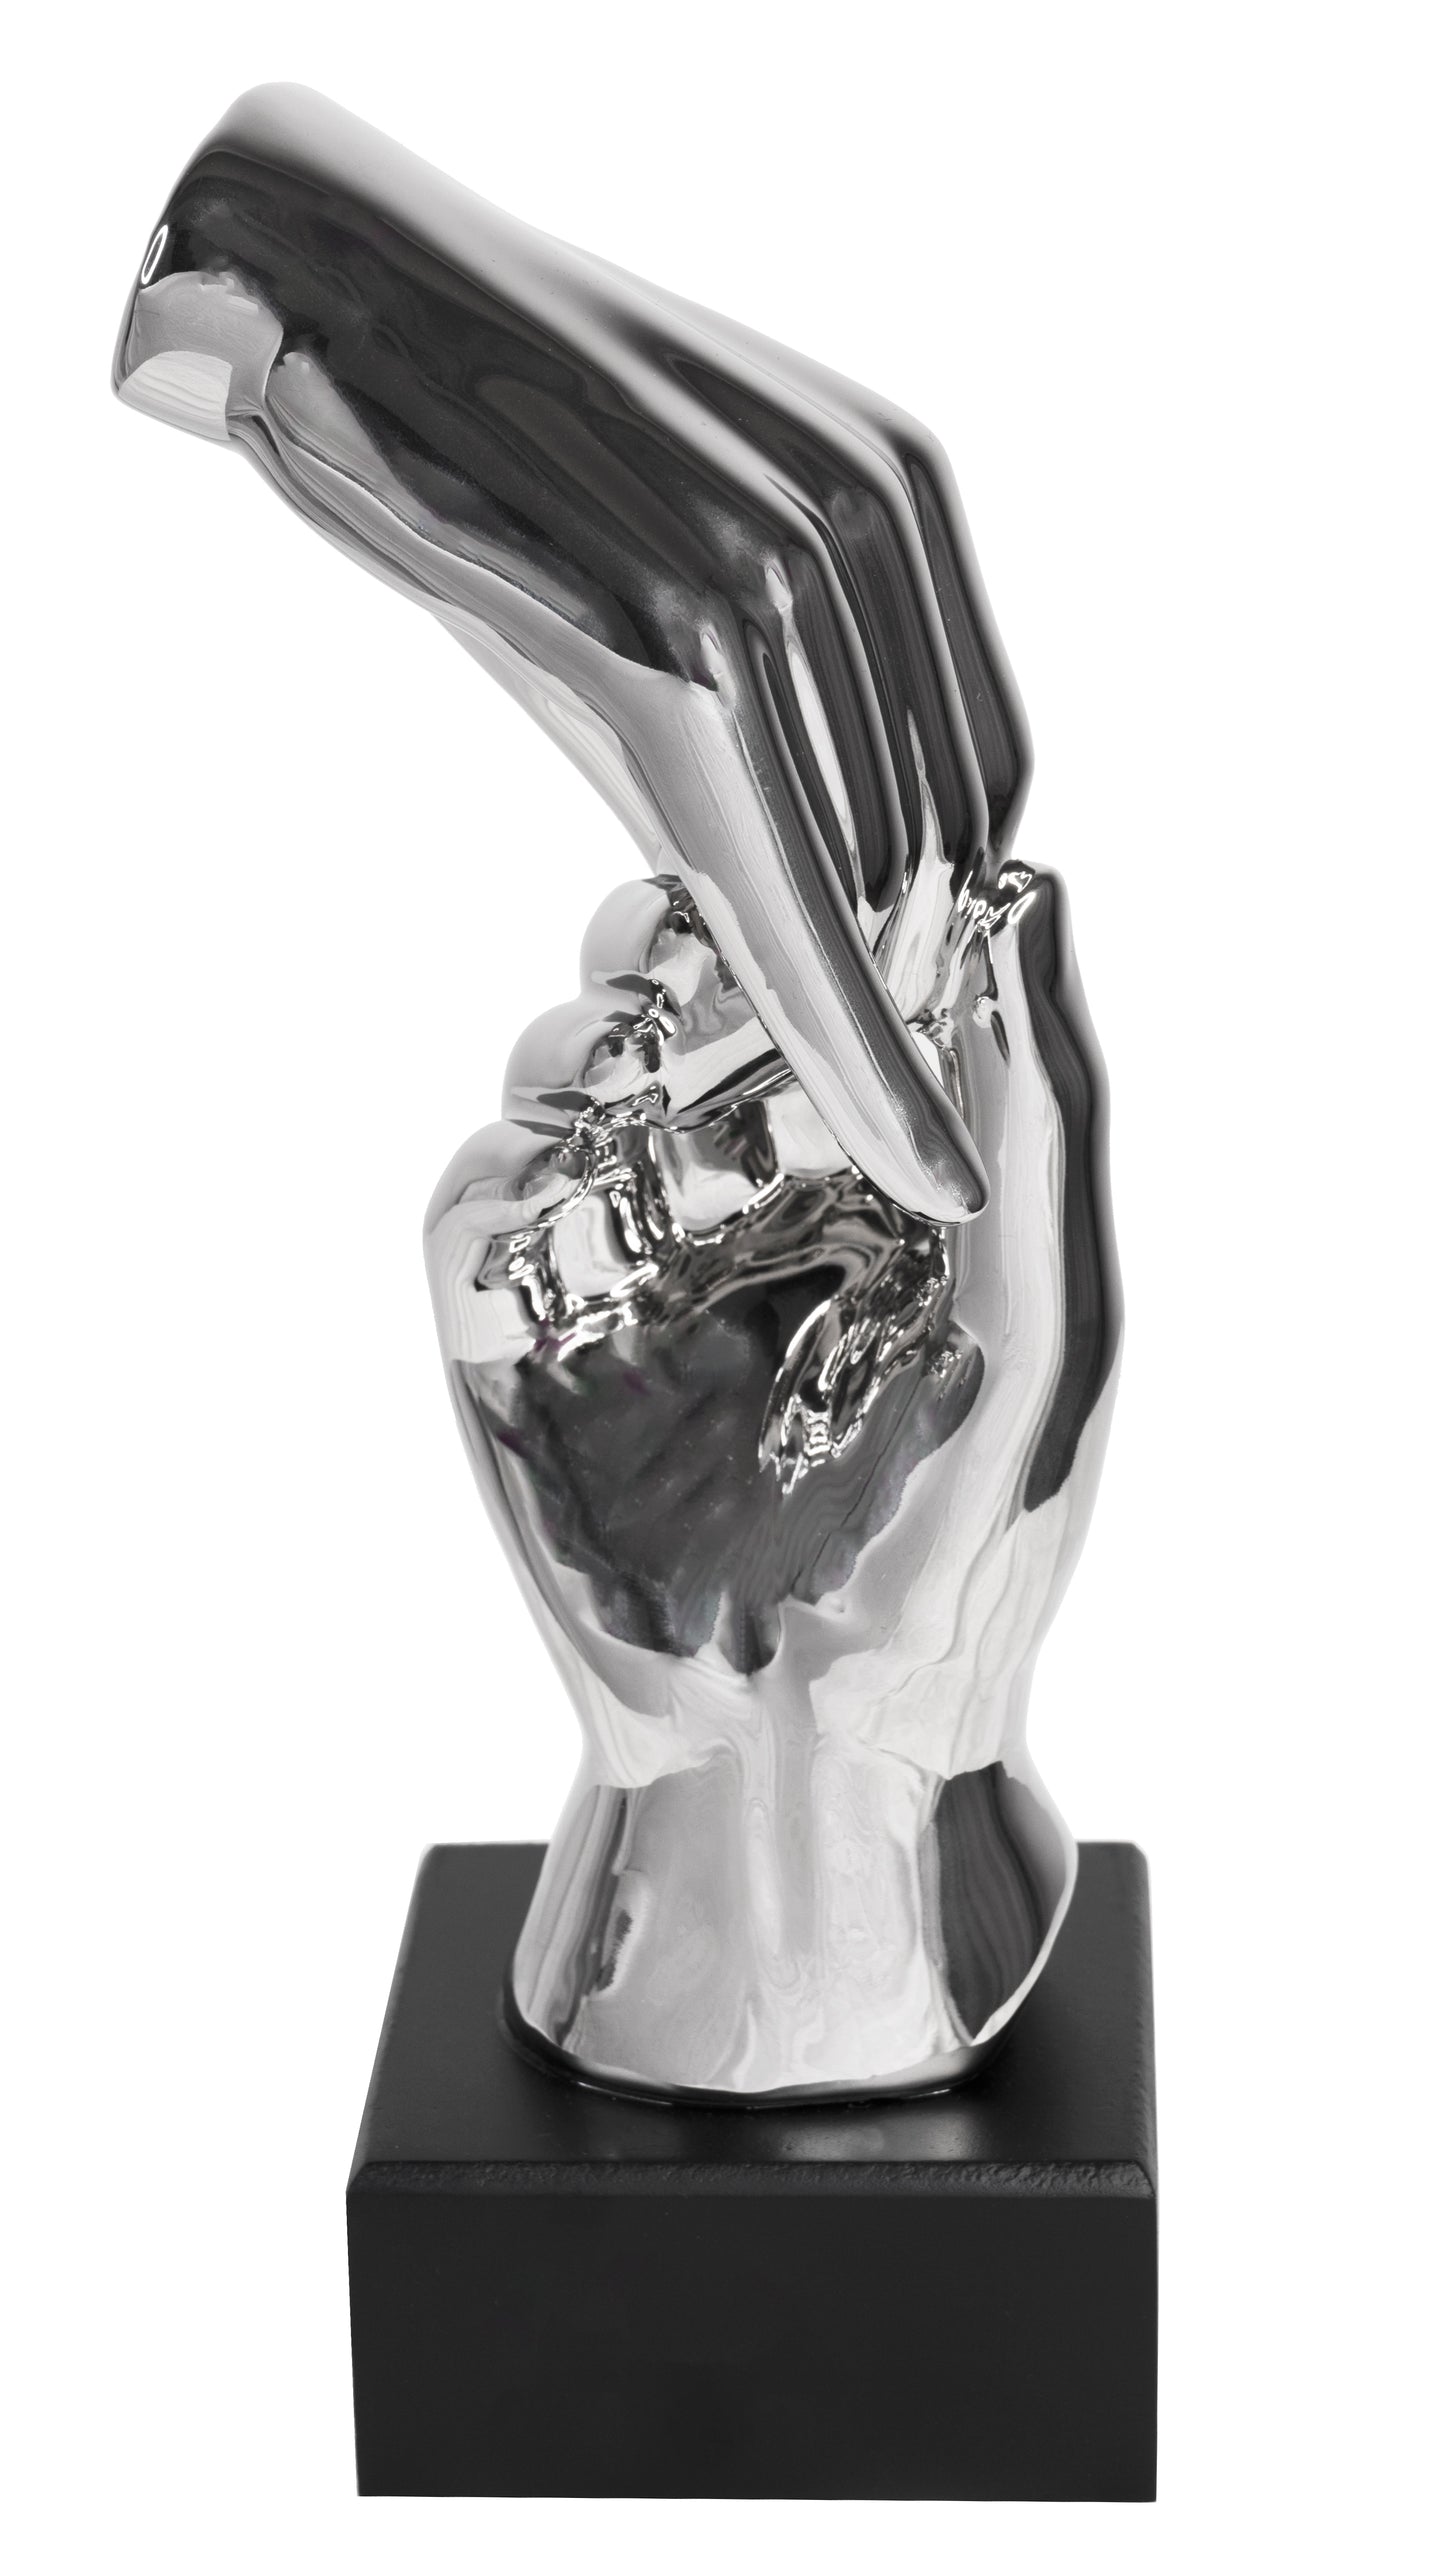 Holding Hands Tabletop Sculpture - Expo Home Decor